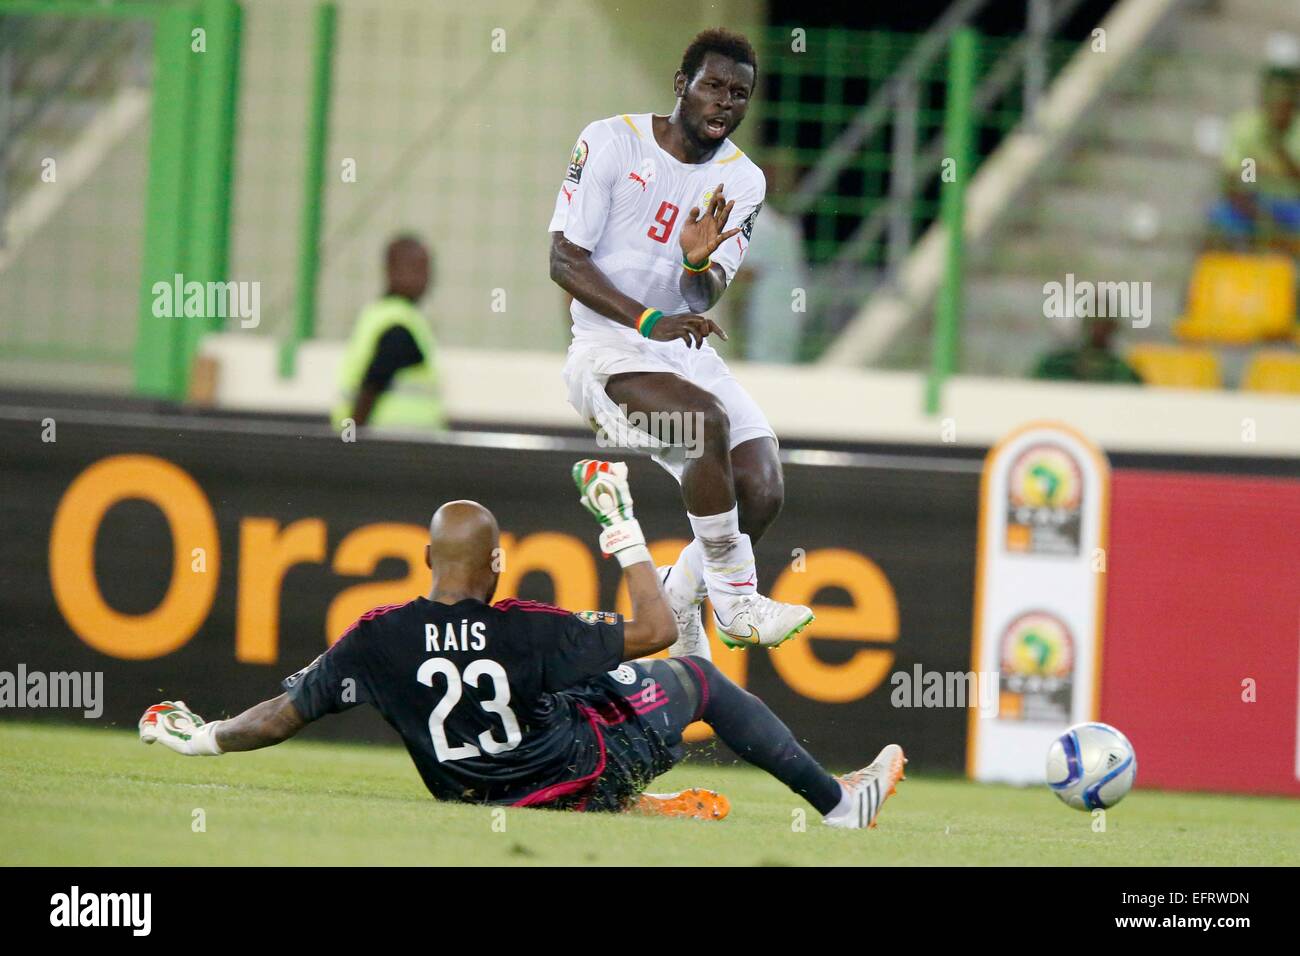 Rais Mbolhi the Algerian keeper challenges Mame Biram Diouf of against Senegal during their AFCON group C match at Estadio de Malabo in Equatorial Guinea on January 27, 2014.Photo/Mohammed Amin/www.pic-centre.com (Equatorial Guinea) Stock Photo